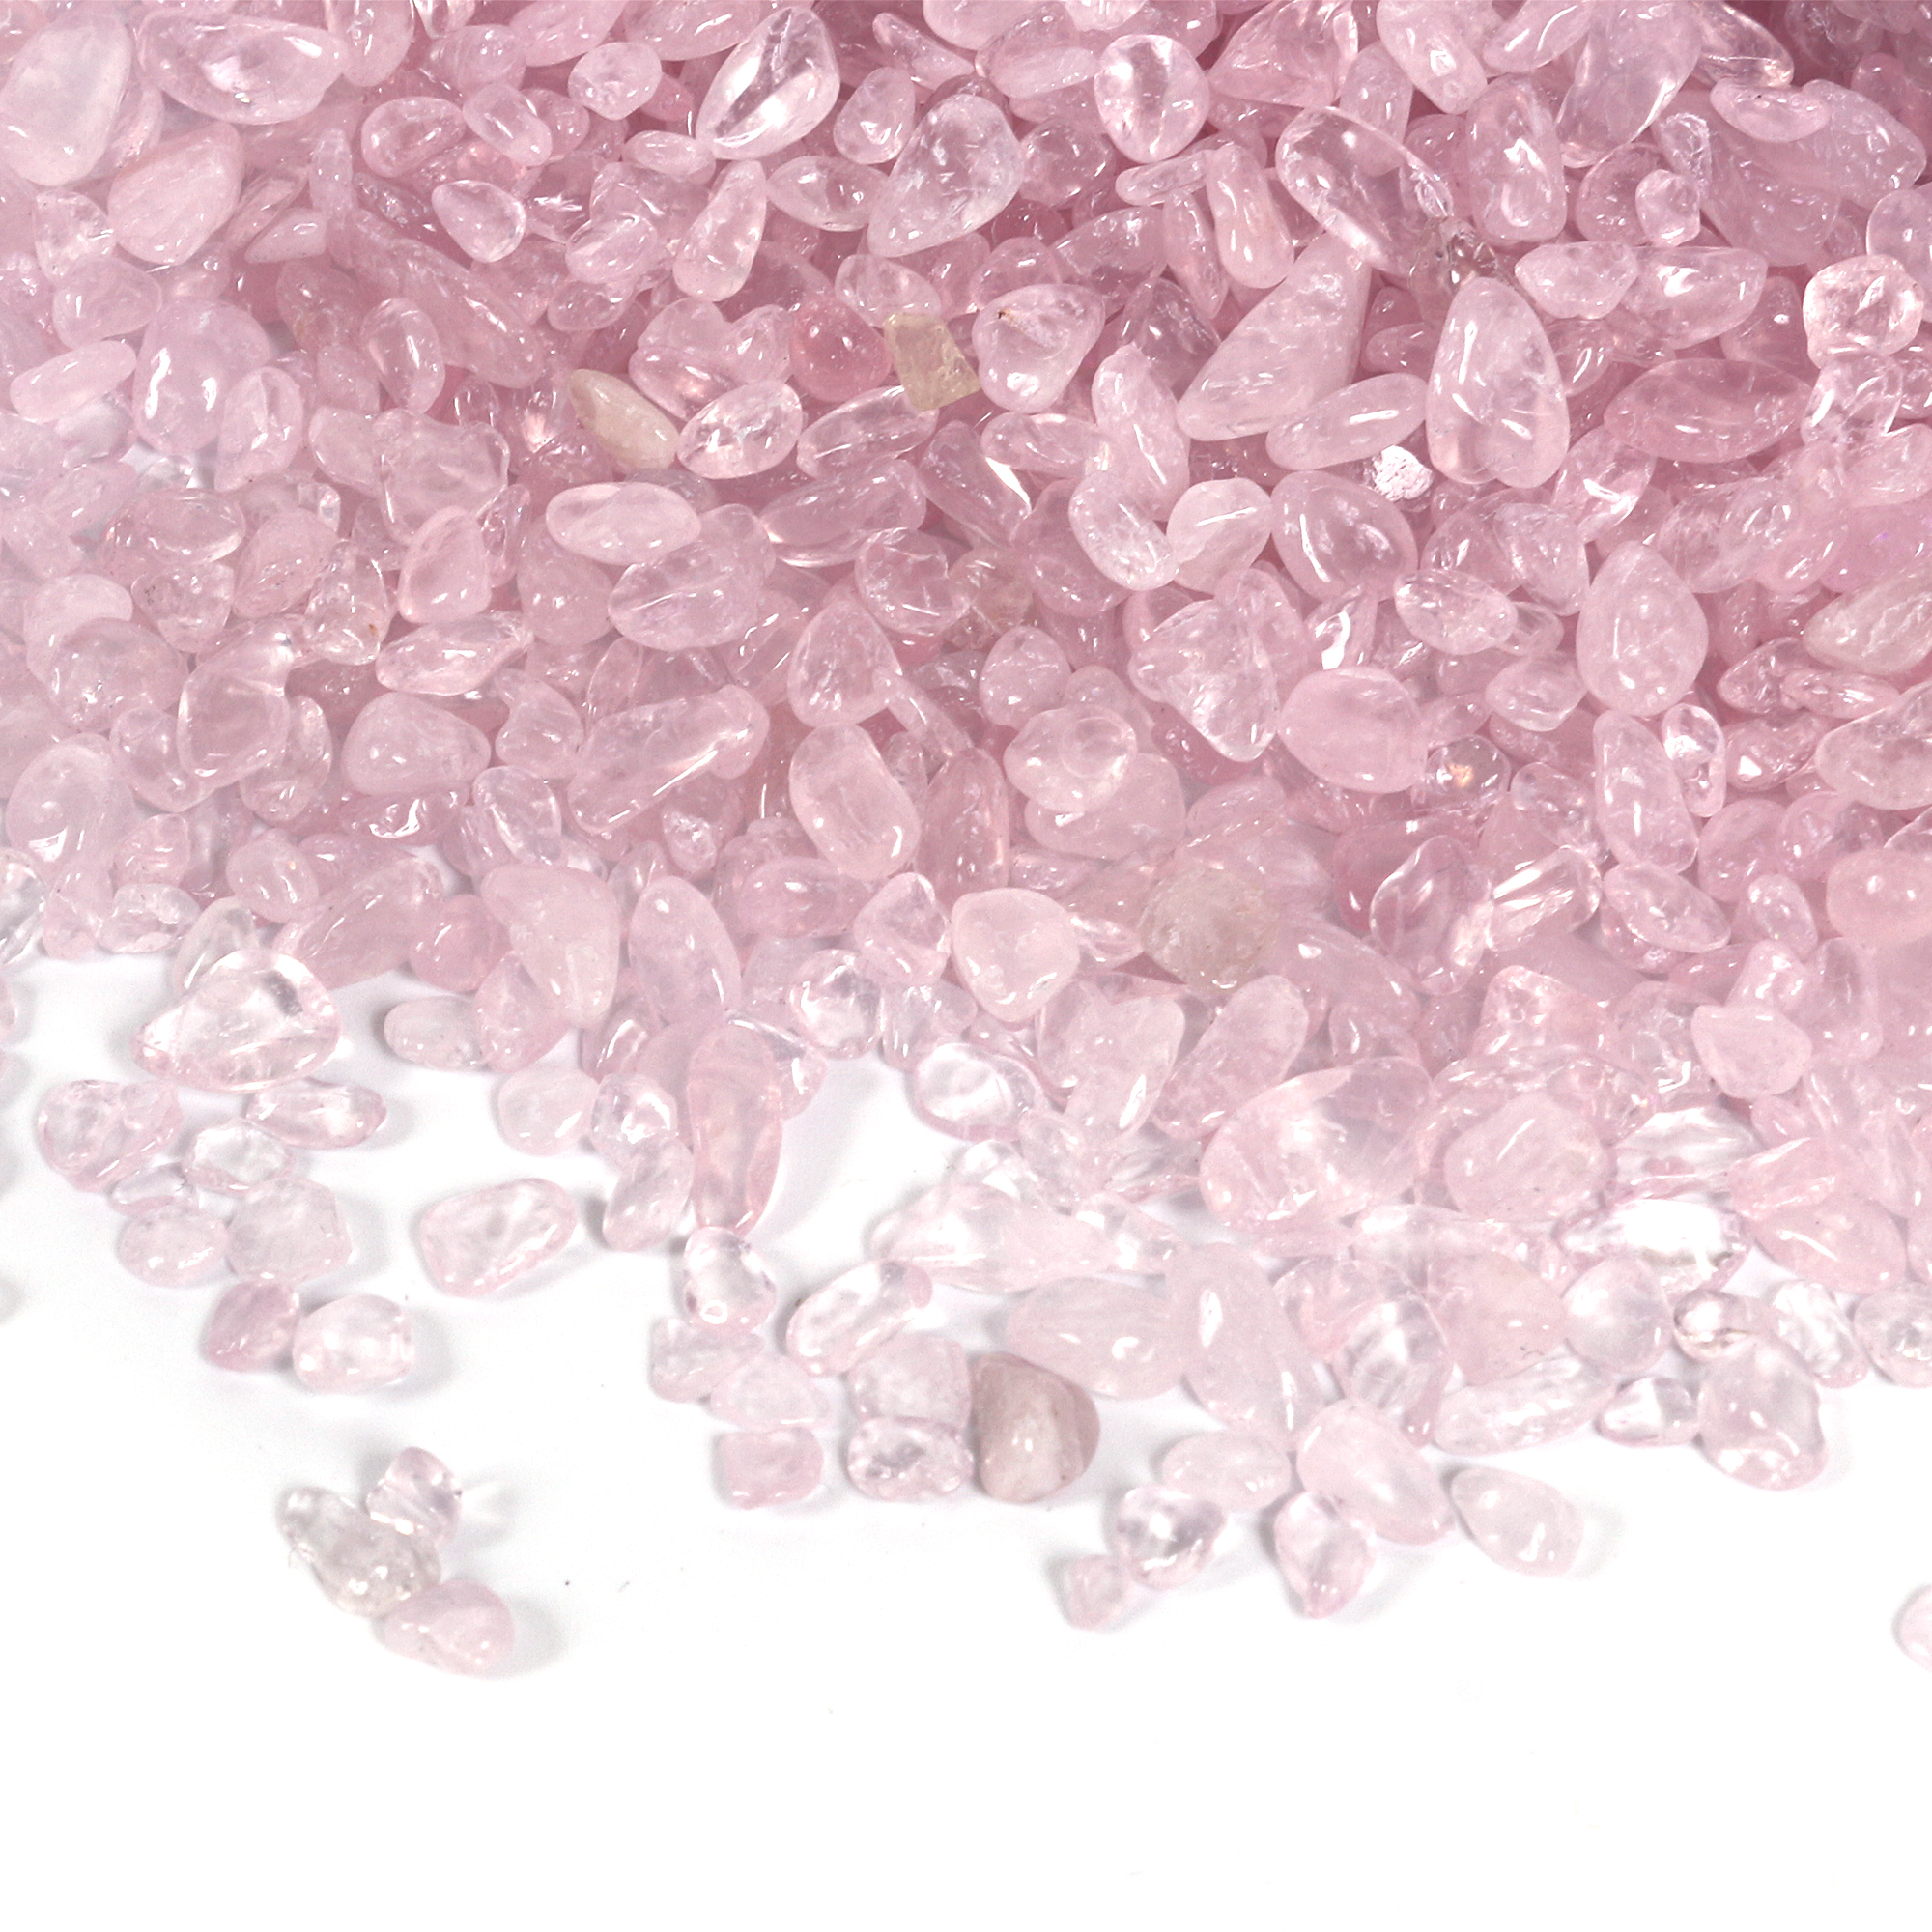 Muggle stones Glasnuggets Decorative stones small in rose packed to 200 g